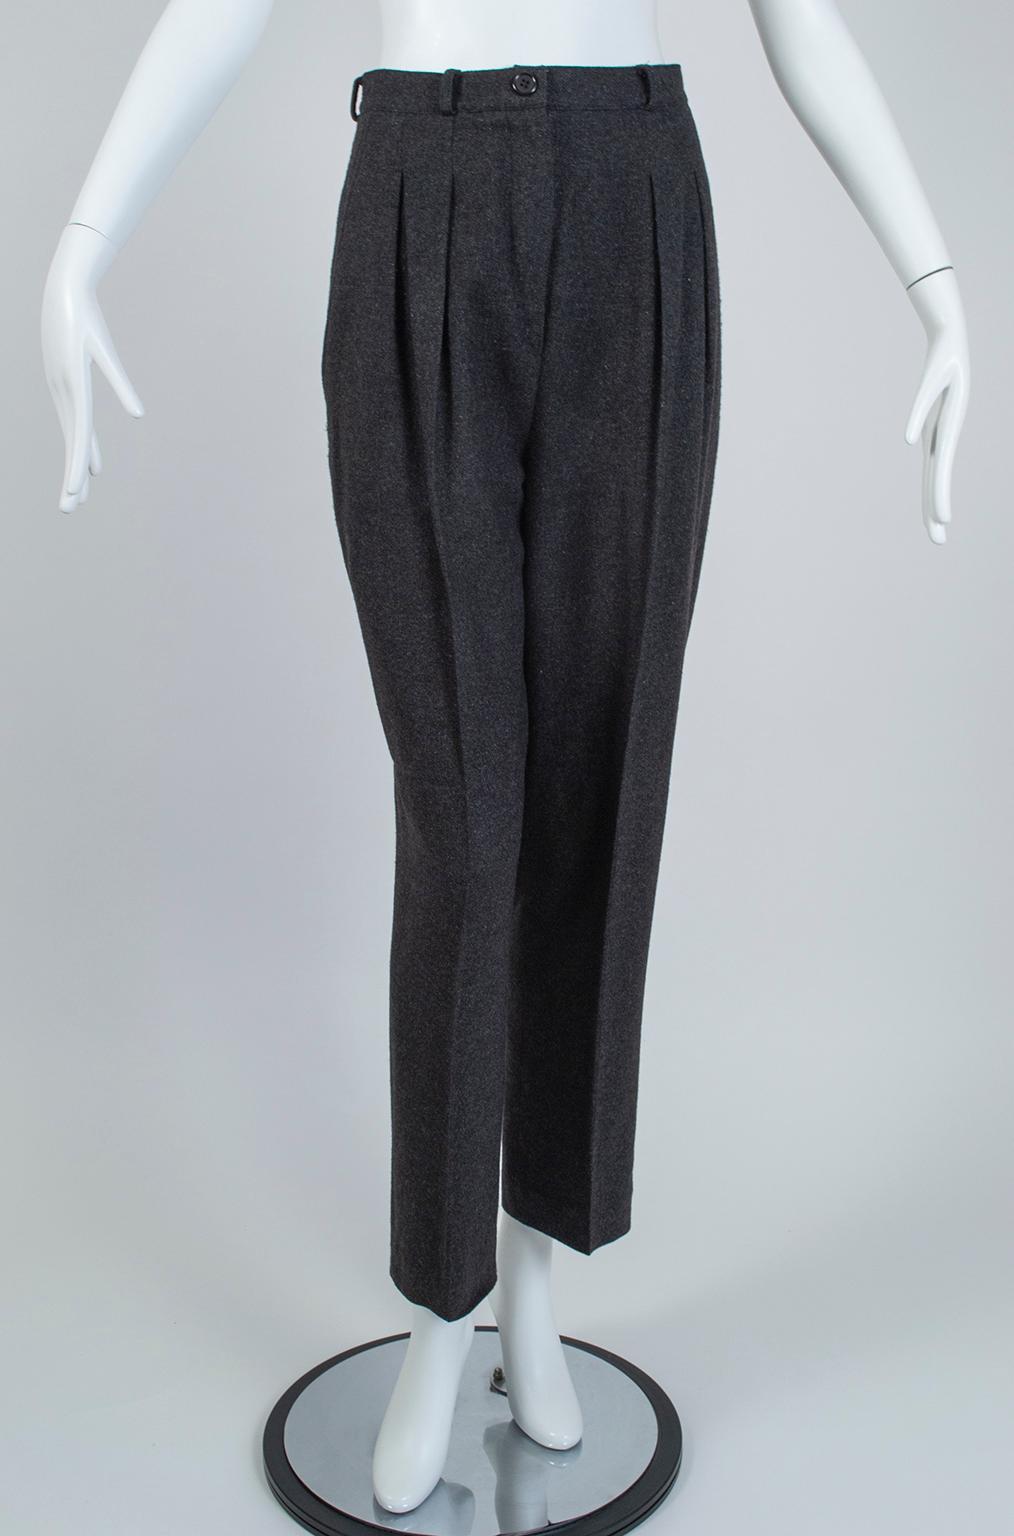 Donna Karan Charcoal Gray Teddy Bear Cashmere and Alpaca Pant Suit - M, 1990s For Sale 1